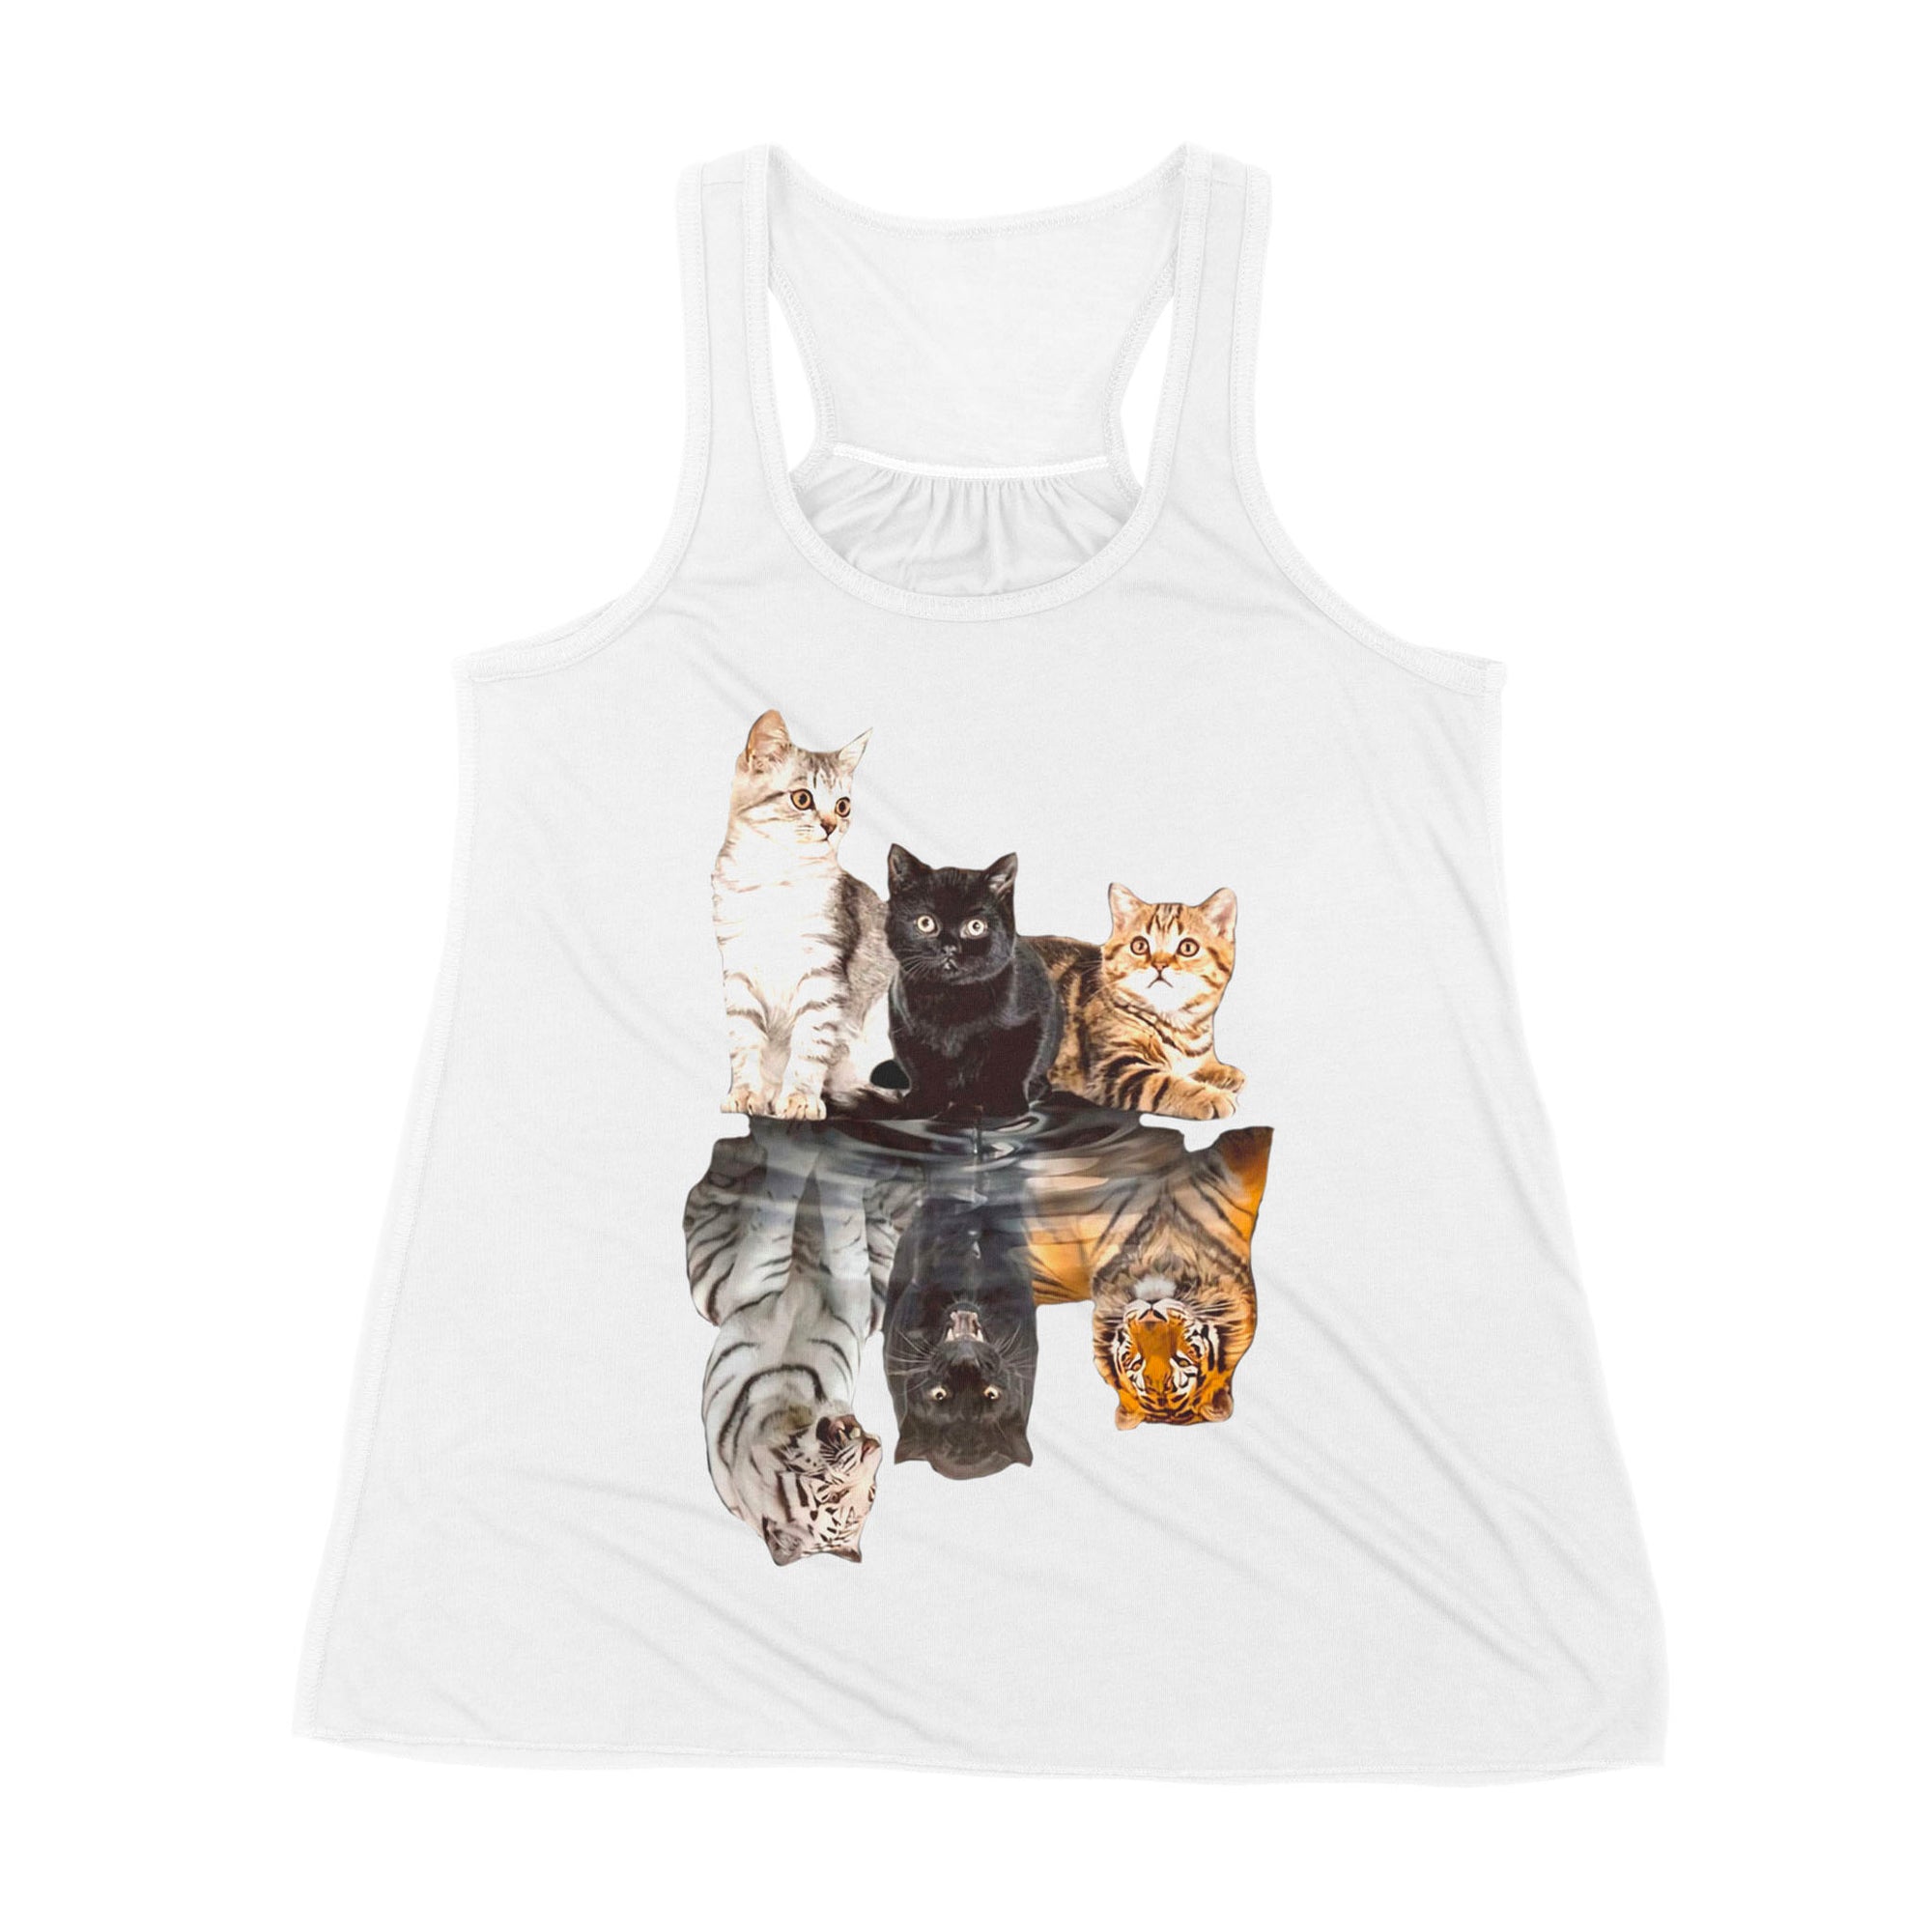 Premium Women's Tank - The Cats Water Mirror Reflection Tigers